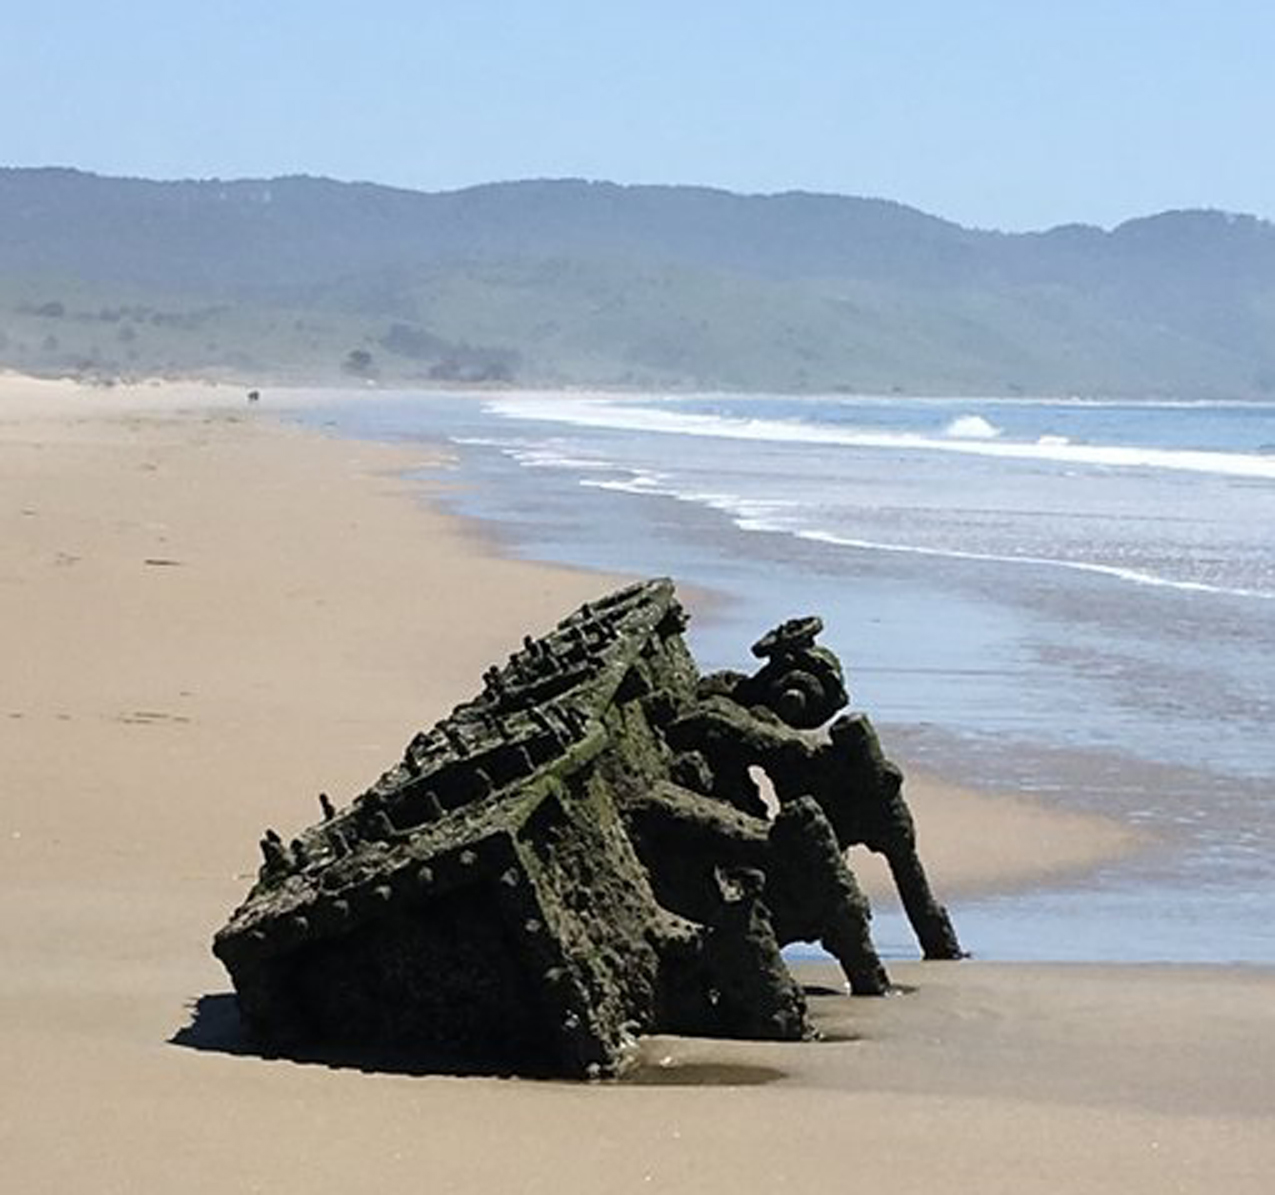 Riveted machinery partially visible on beach